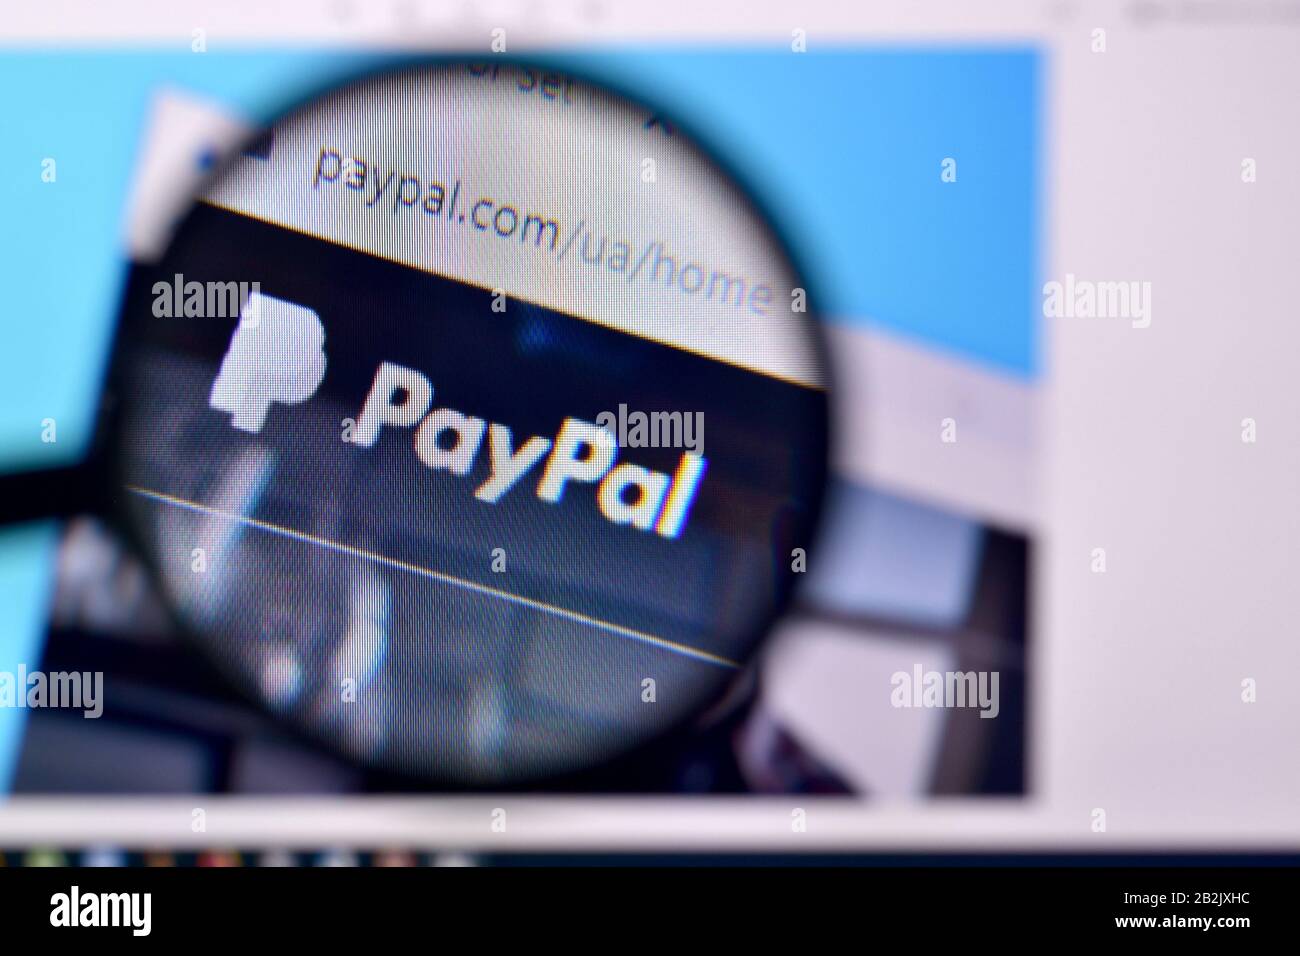 NY, USA - FEBRUARY 29, 2020: Homepage of paypal website on the display of PC, url - paypal.com. Stock Photo